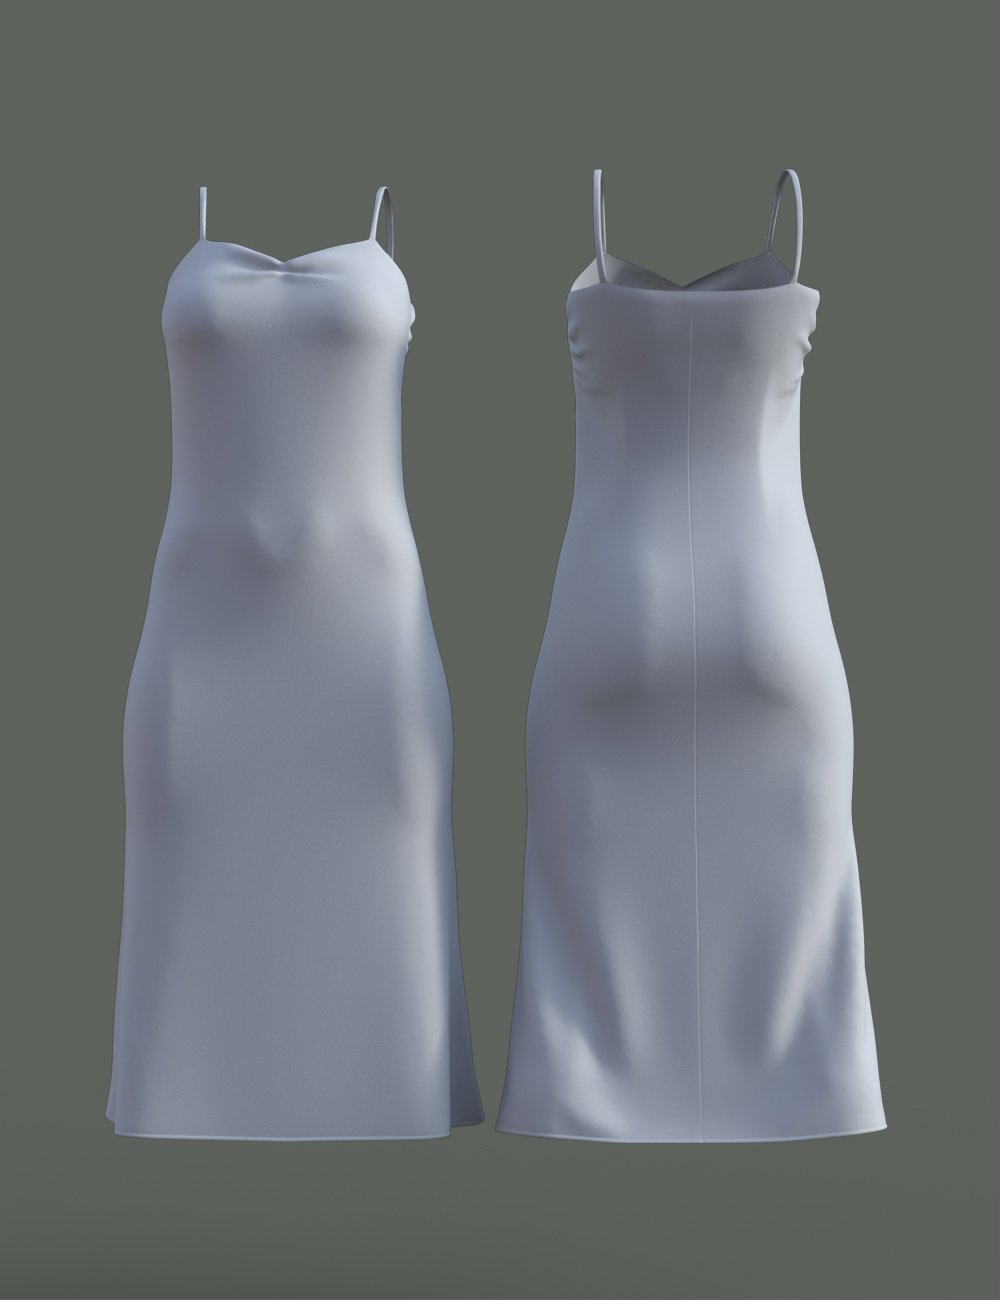 dForce Summer Cocktail Slip Dress for Genesis 8 and 8.1 Females by: Dimidrol, 3D Models by Daz 3D